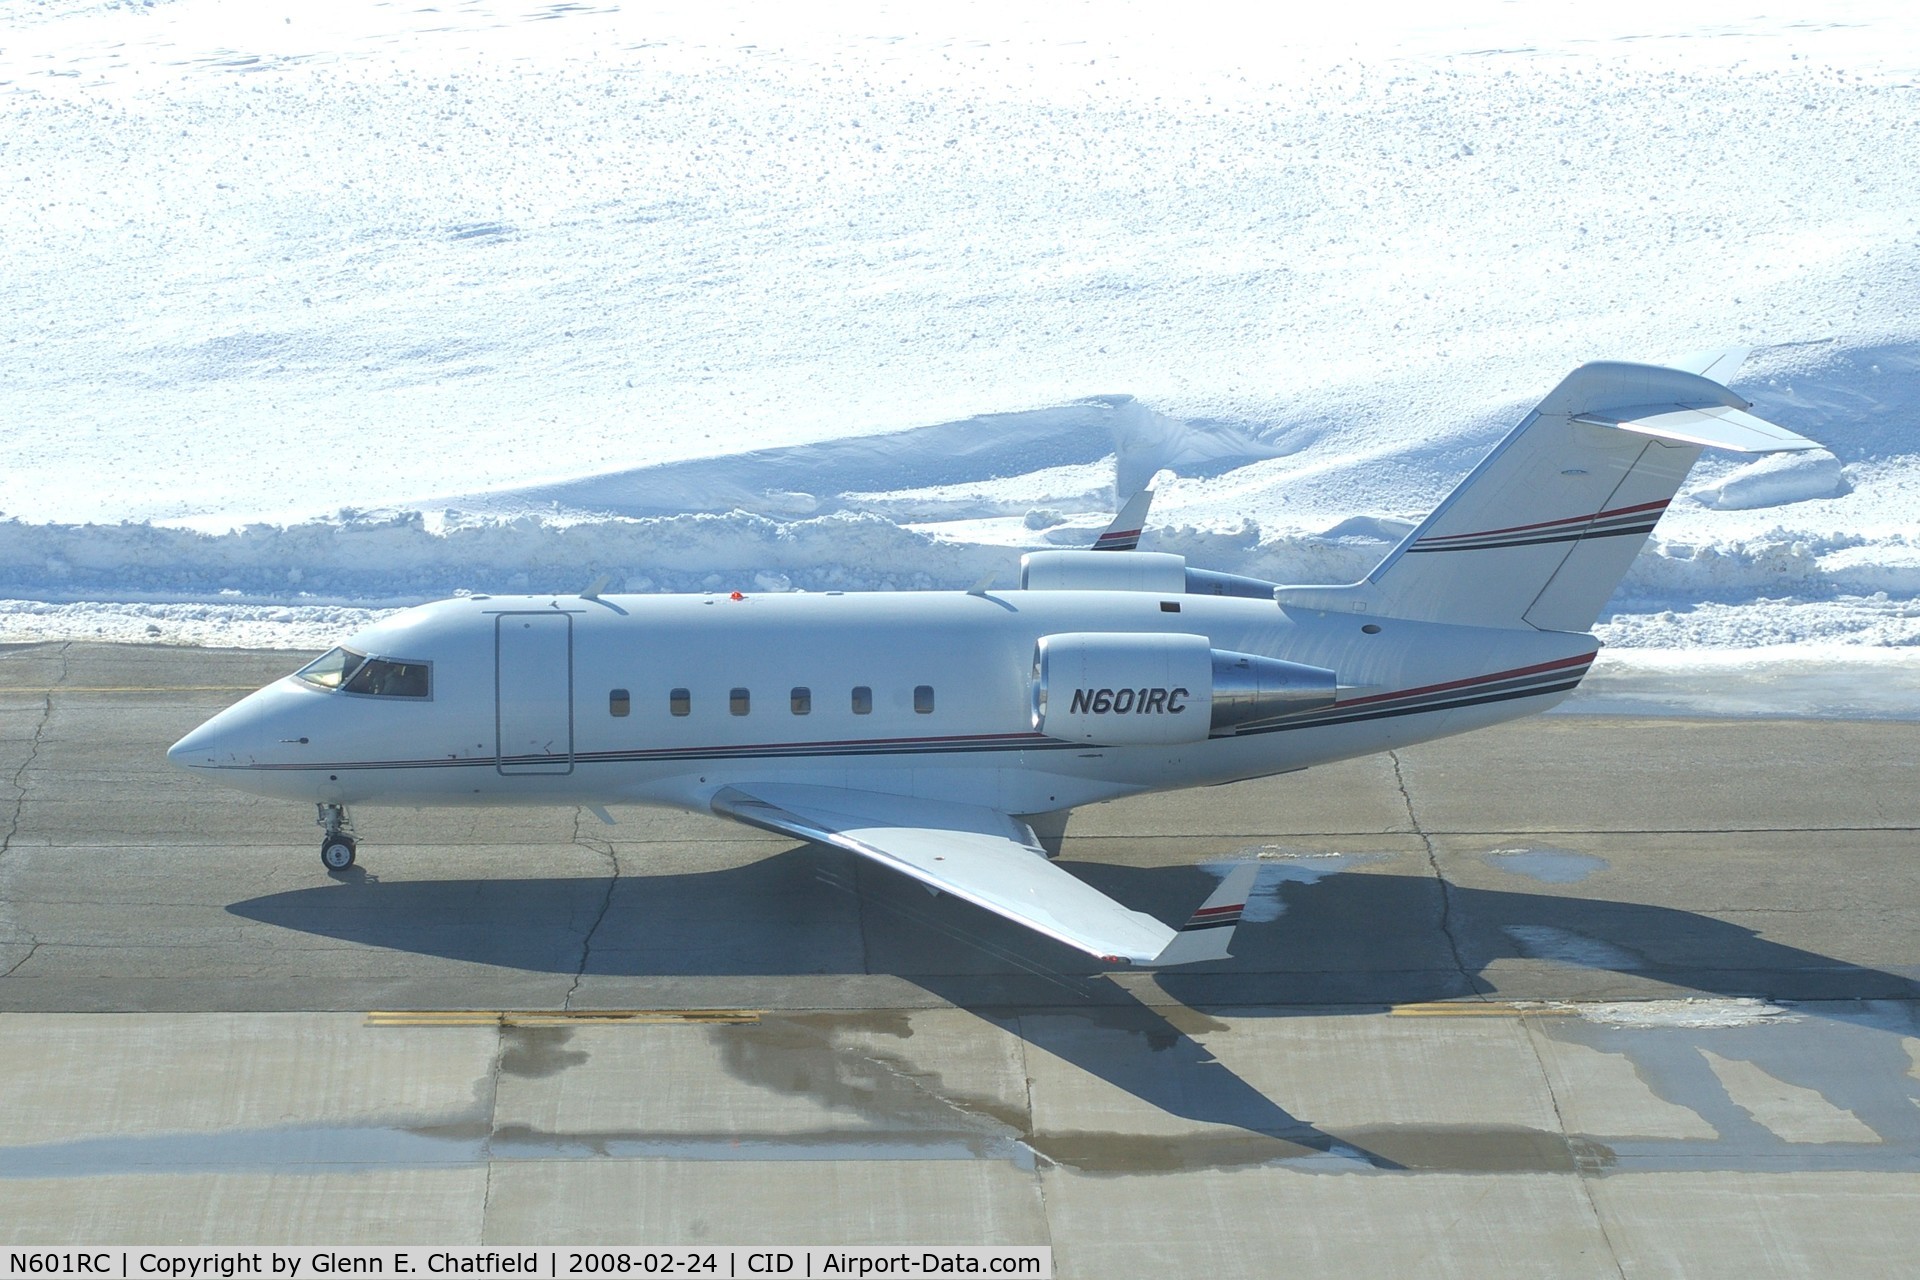 N601RC, 1986 Canadair Challenger 601 (CL-600-2A12) C/N 3055, One of Rockwell-Collins' planes